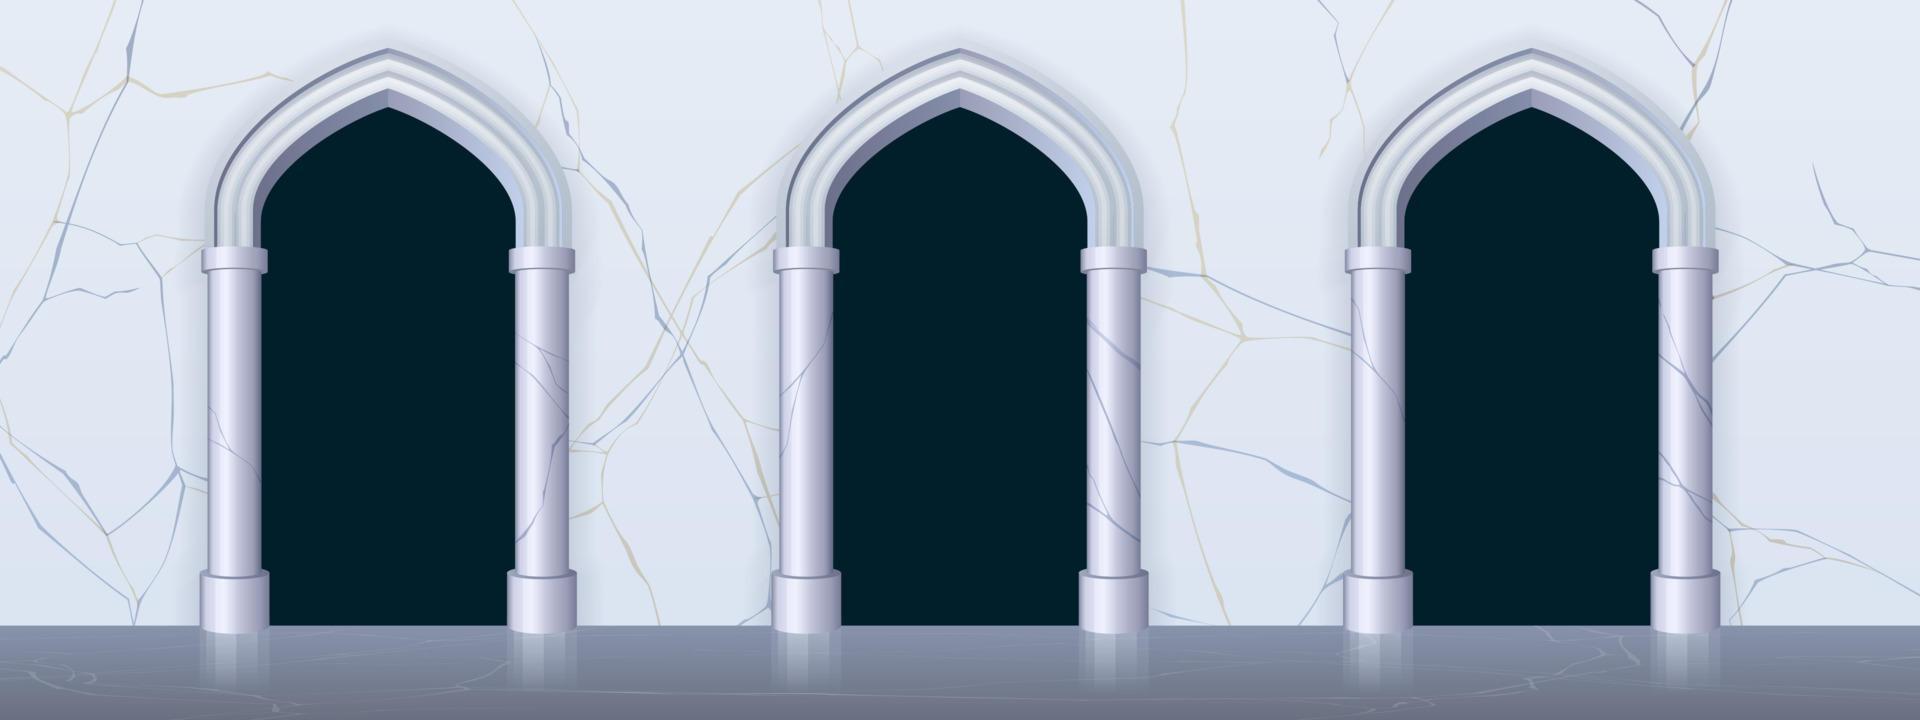 Arches with columns at marble wall, interior gates vector